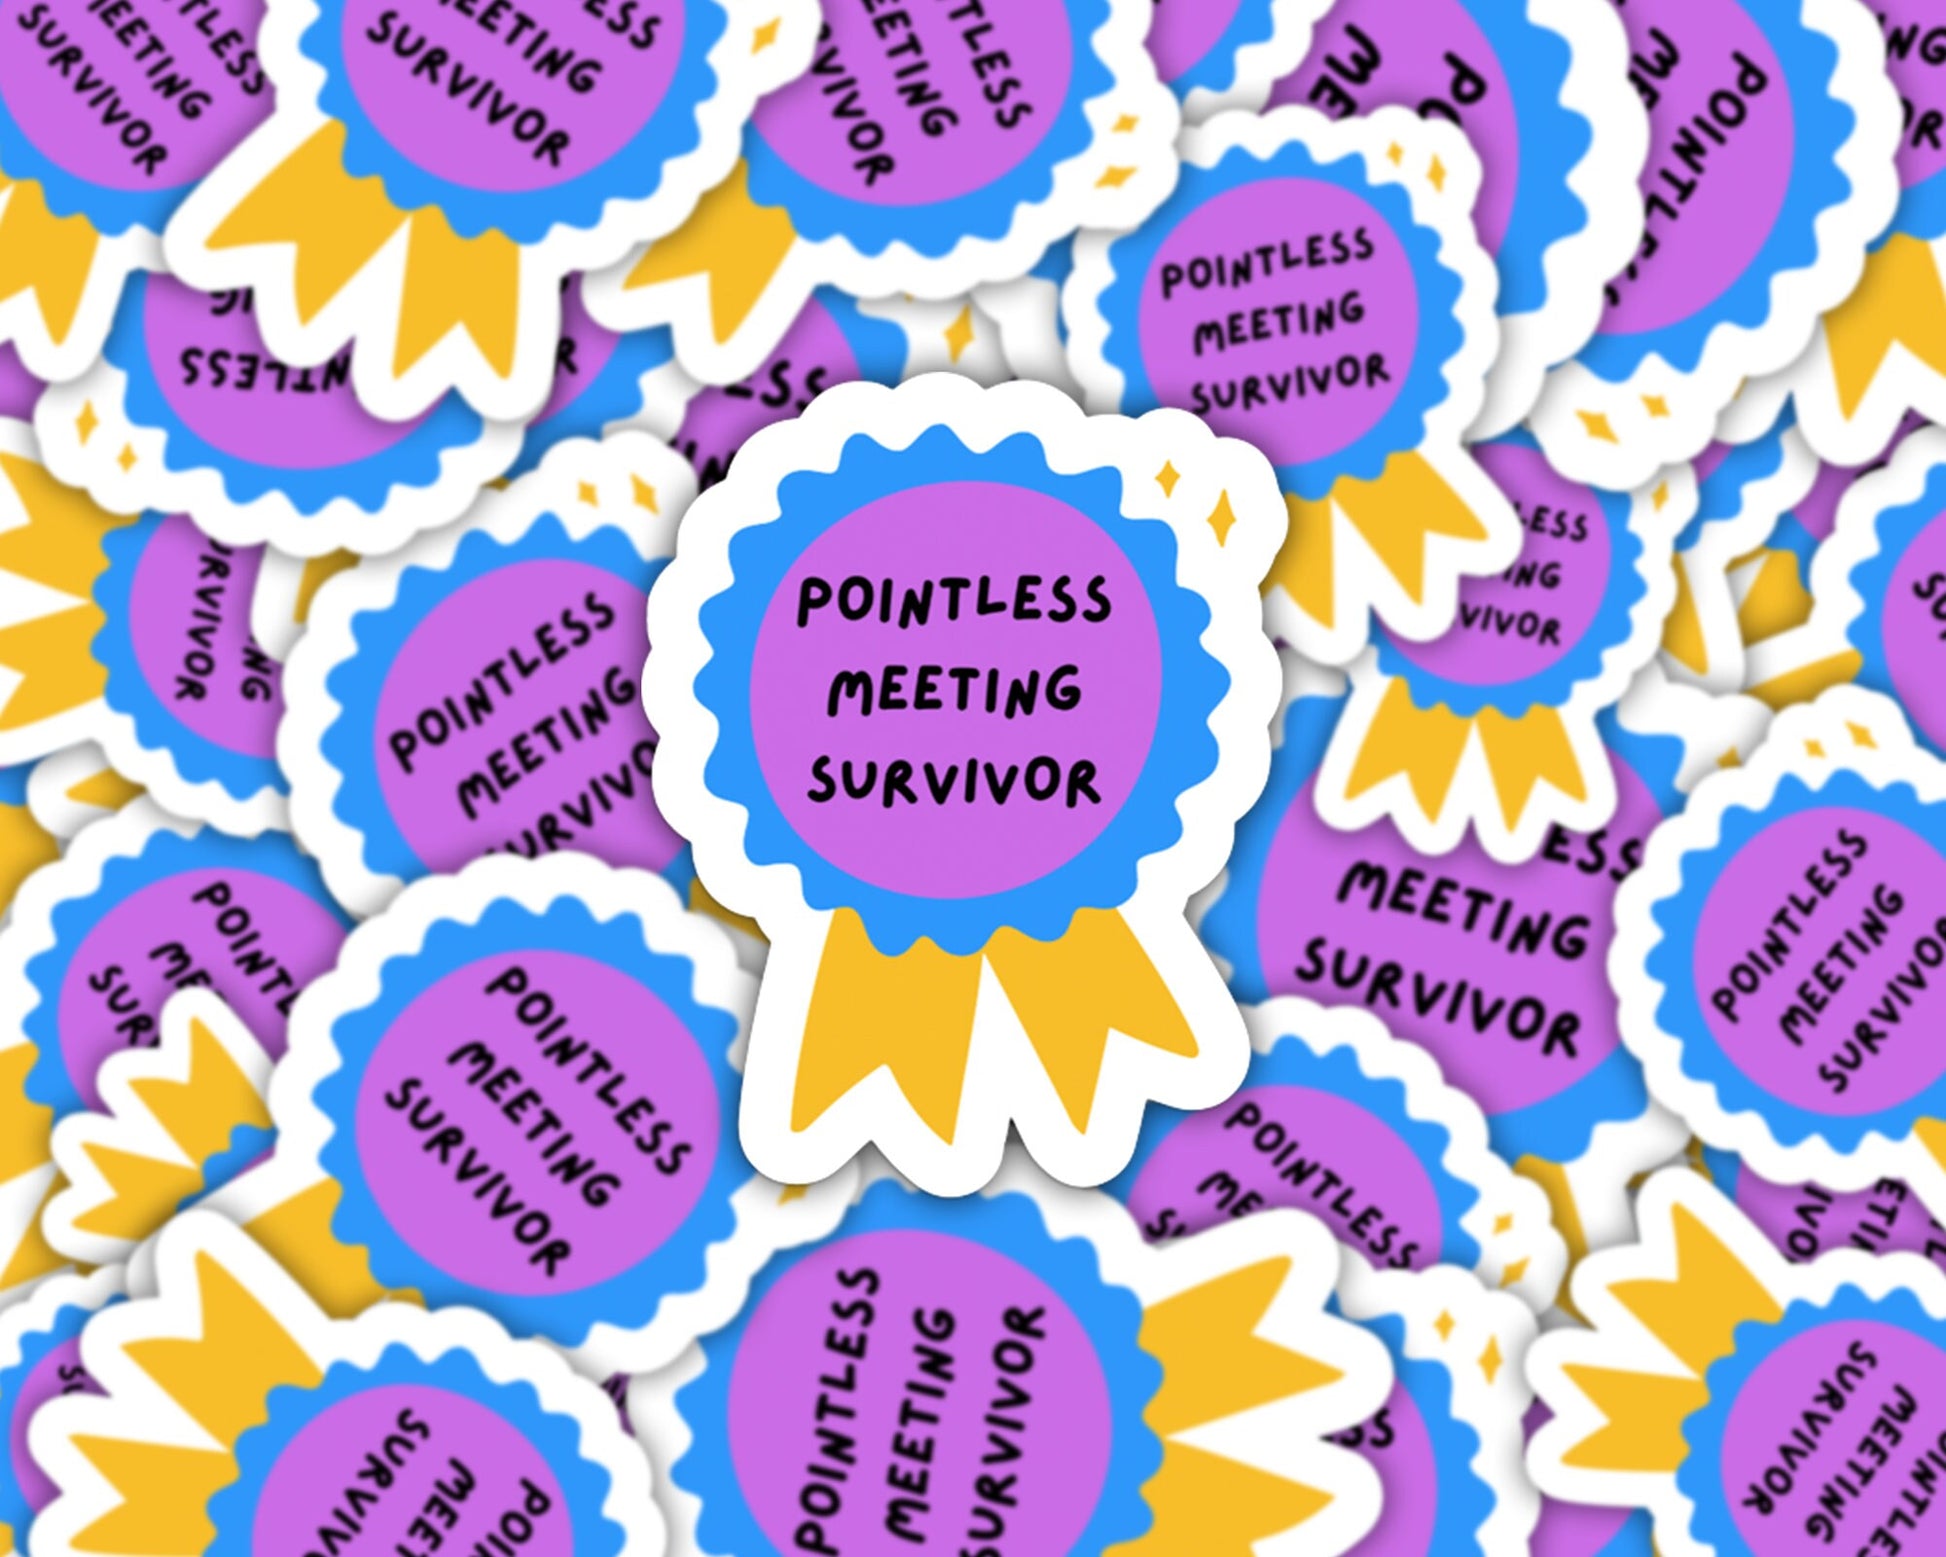 pointless meeting survivor sticker, corporate america sticker, nurse manager, work from home sticker, stickers for bosses, white elephant